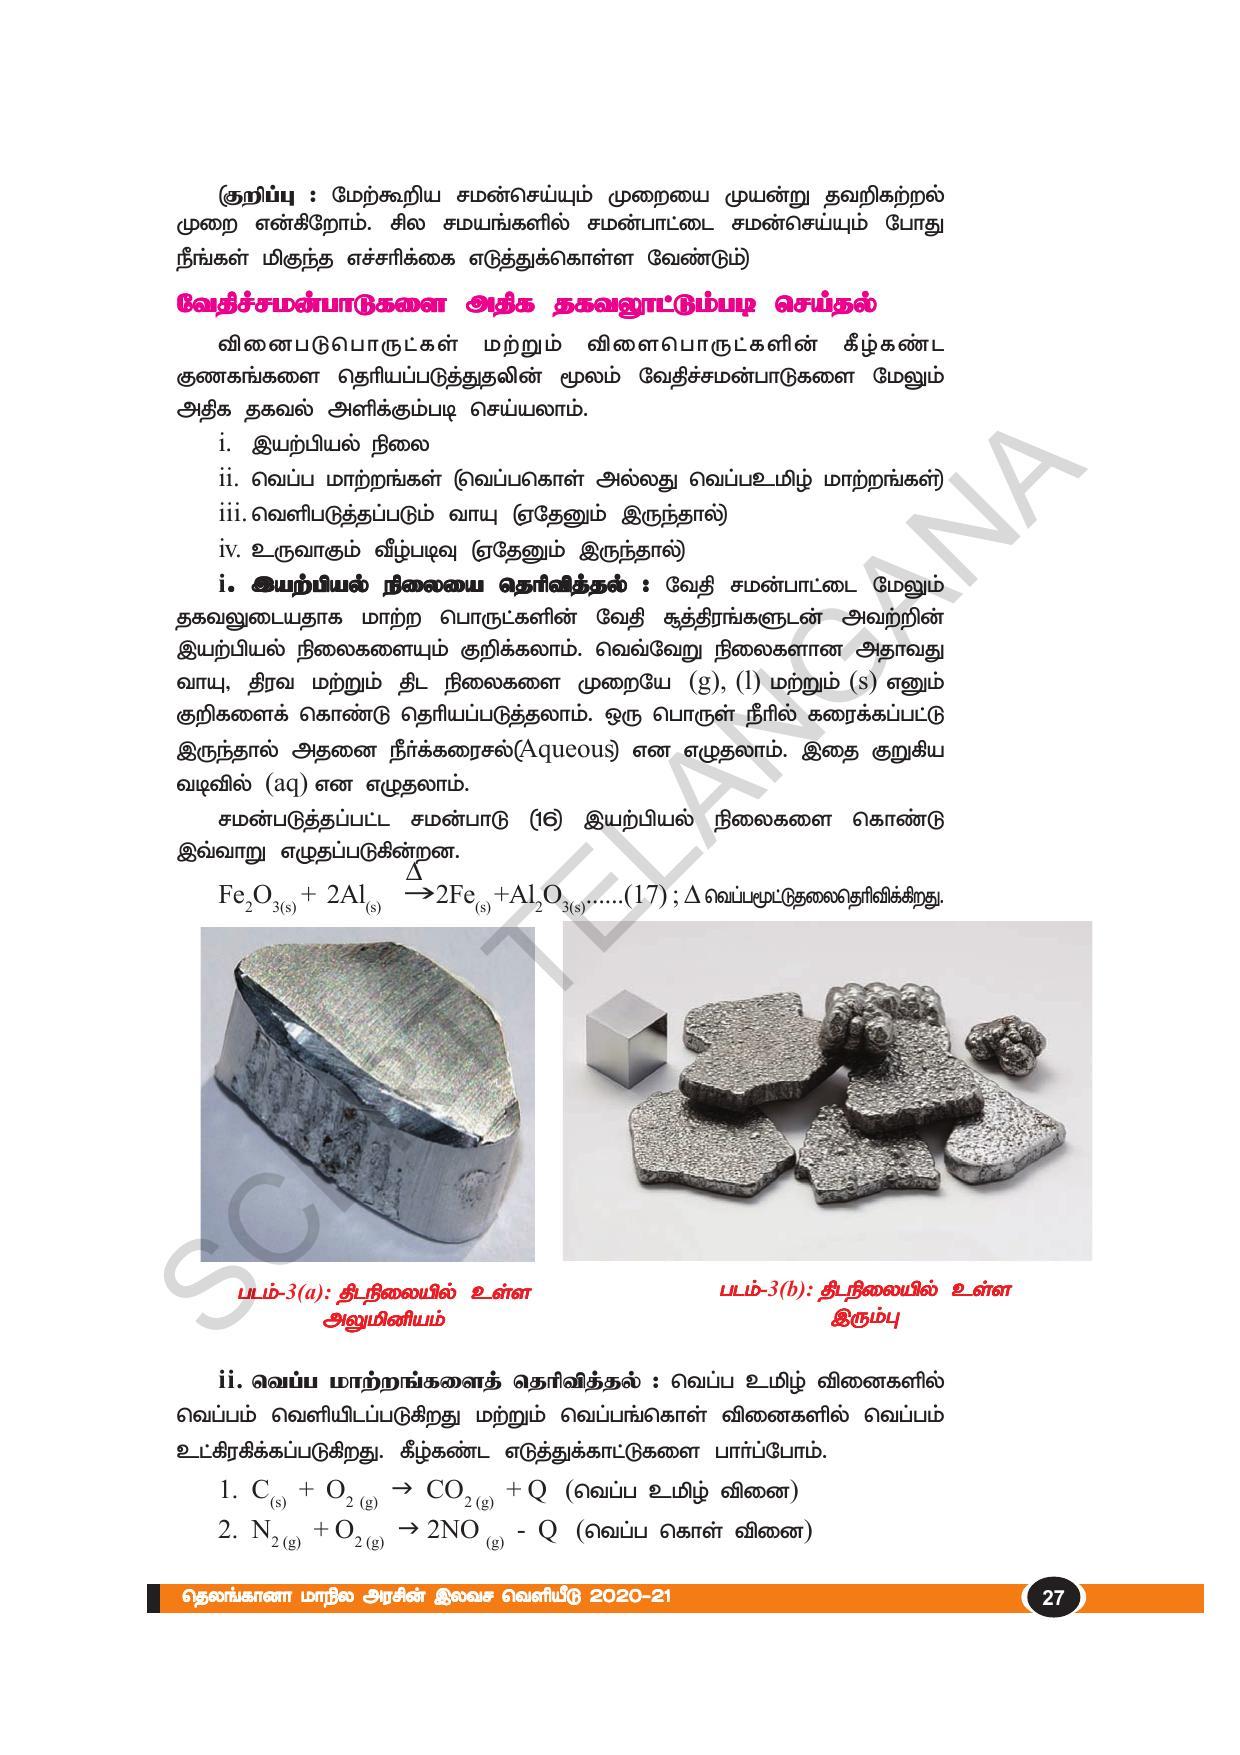 TS SCERT Class 10 Physical Science(Tamil Medium) Text Book - Page 39